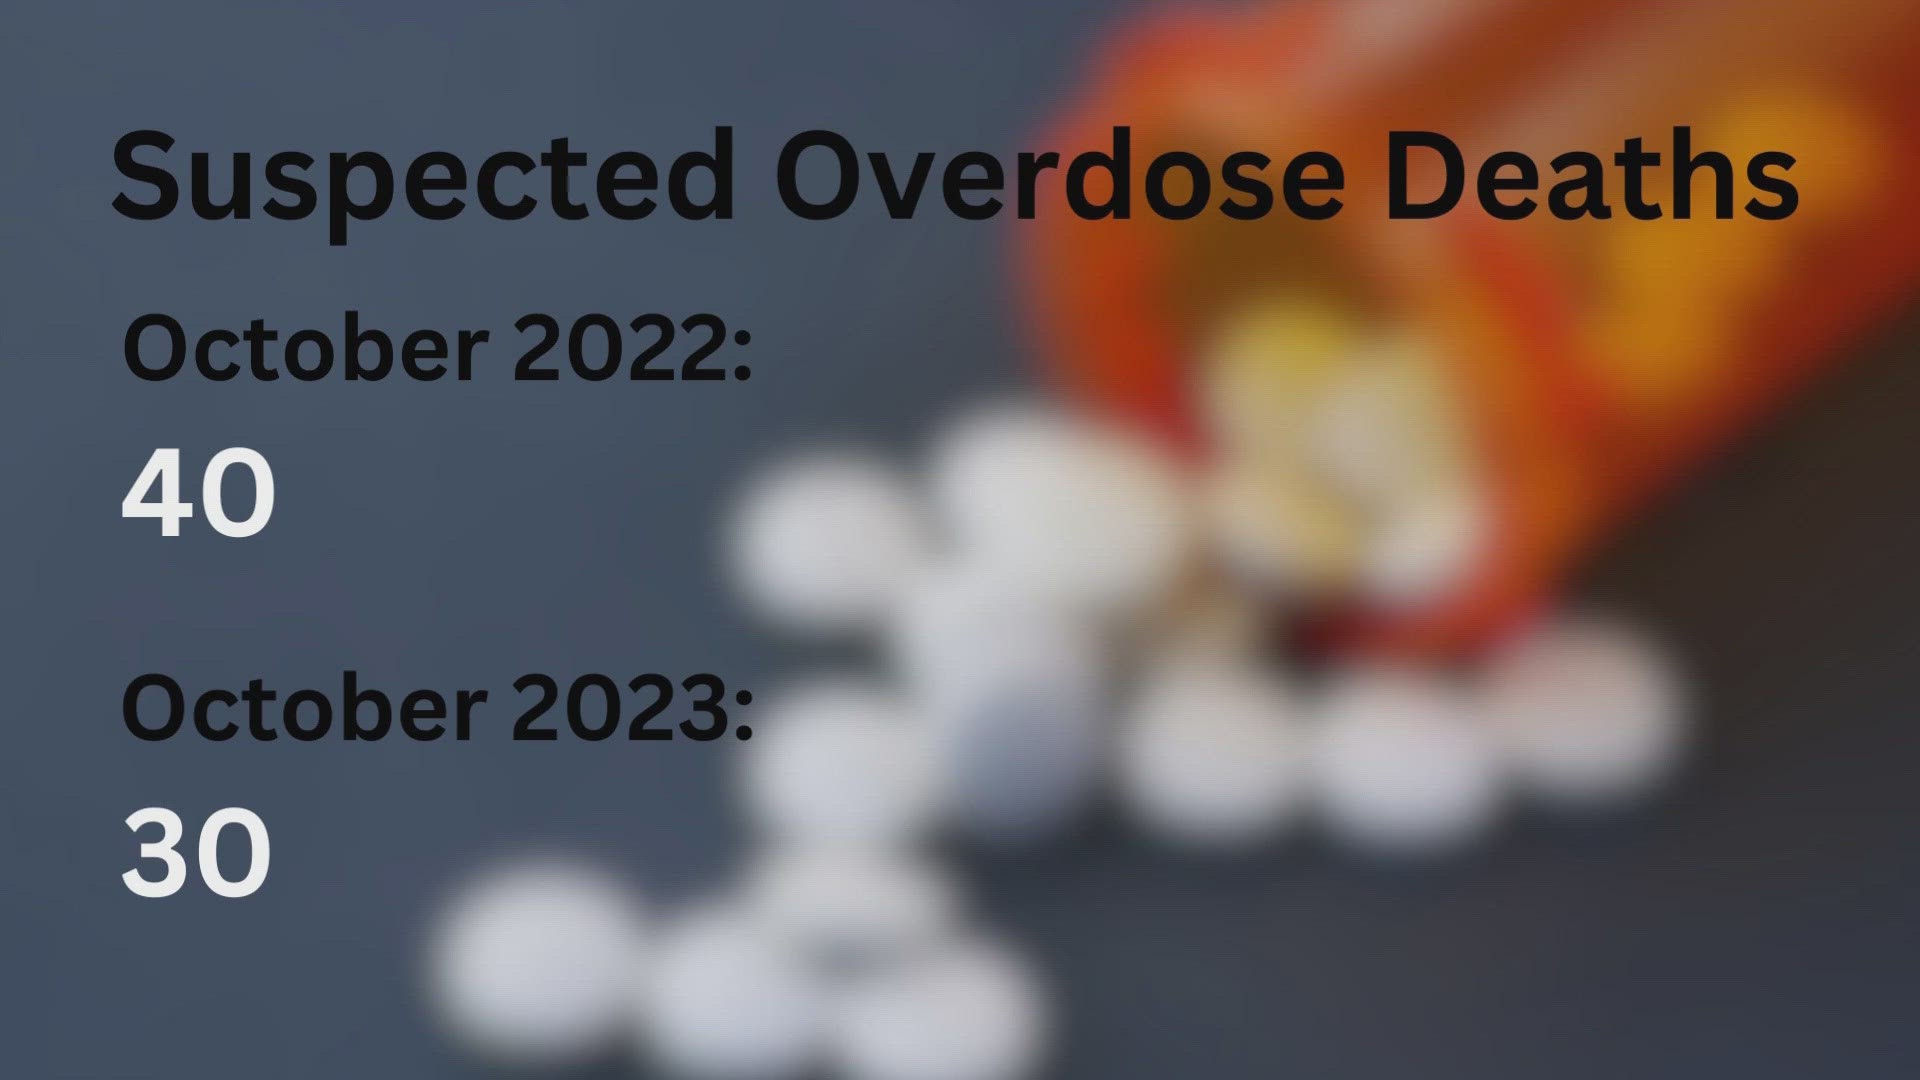 The District Attorney General's Office said the number of overdoses are on the decline in Knox County.